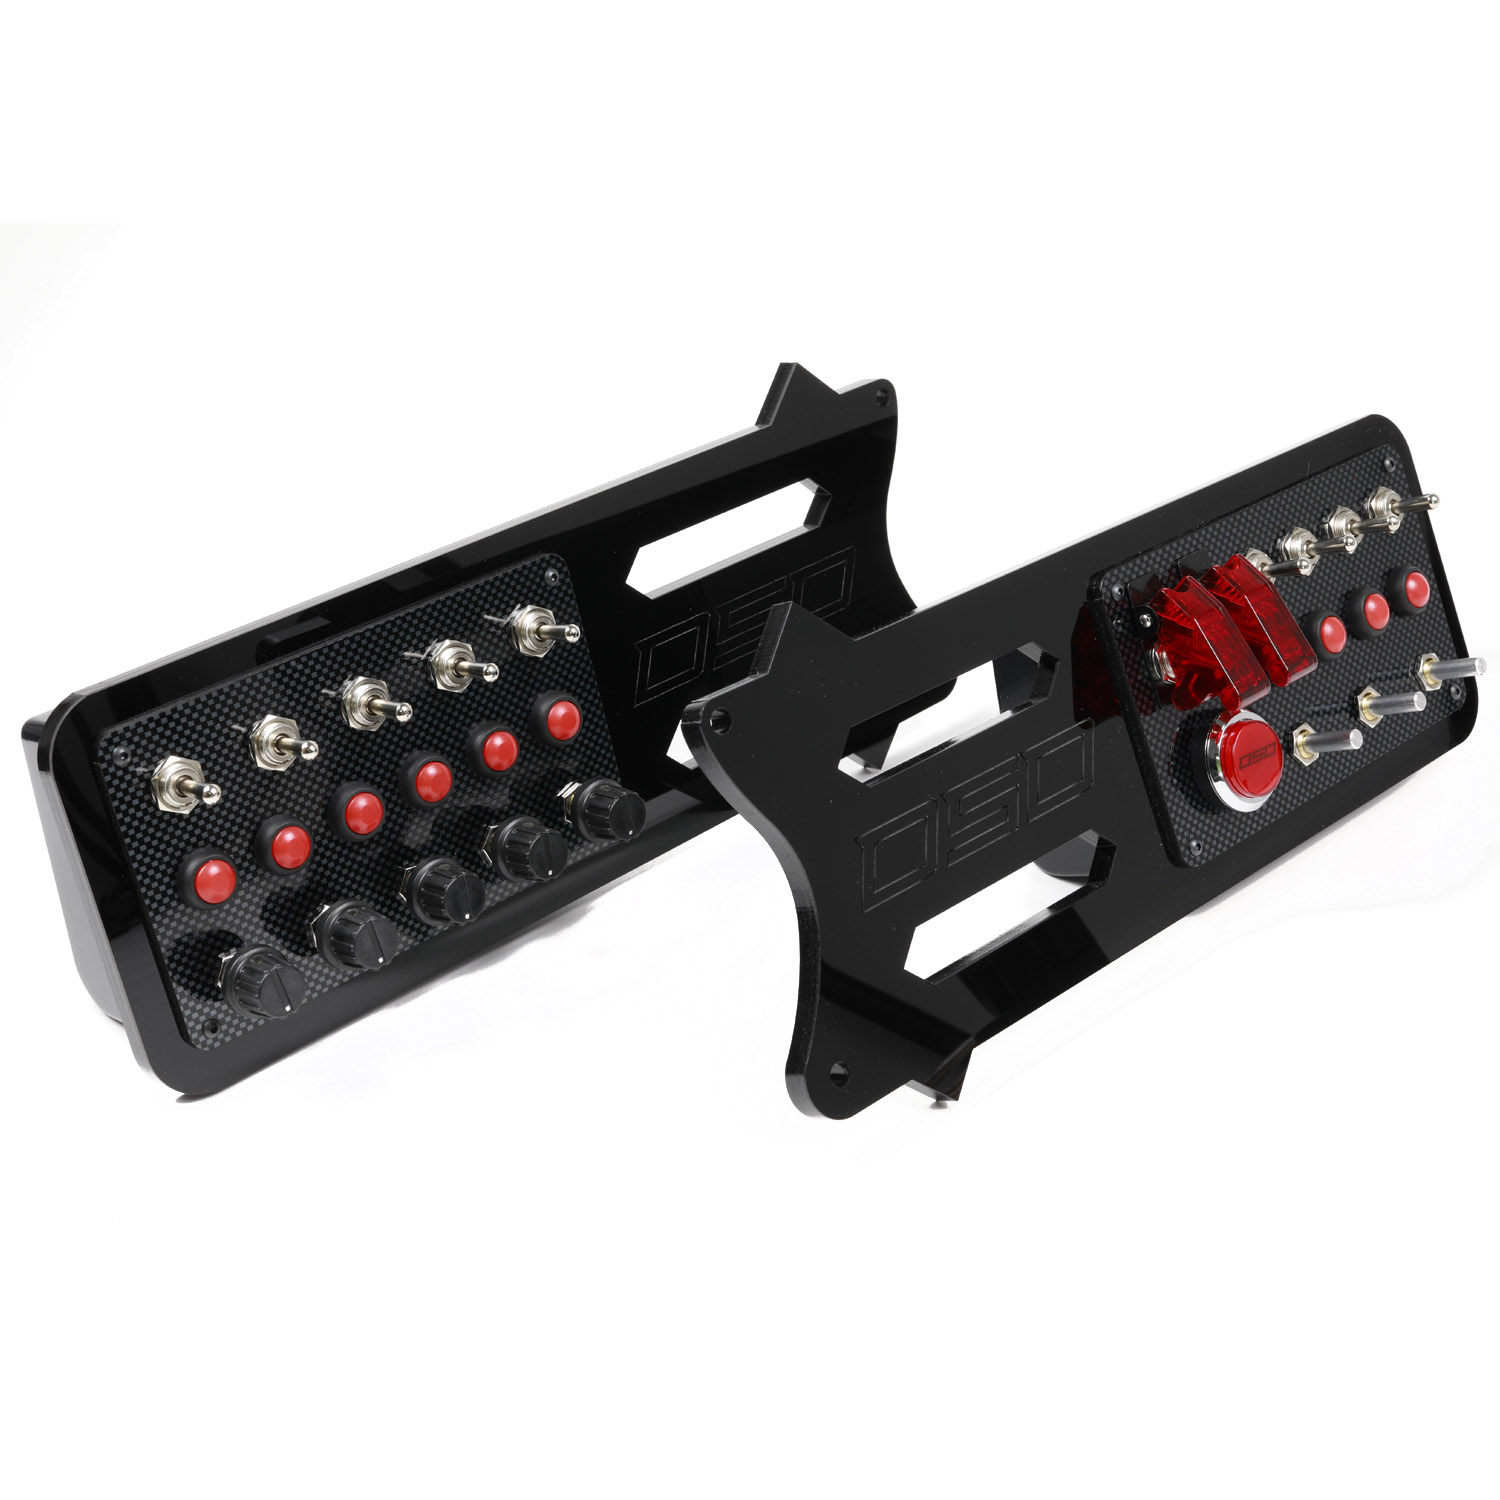 Sim Racing Button Boxes & Control Switch Panels for Sale